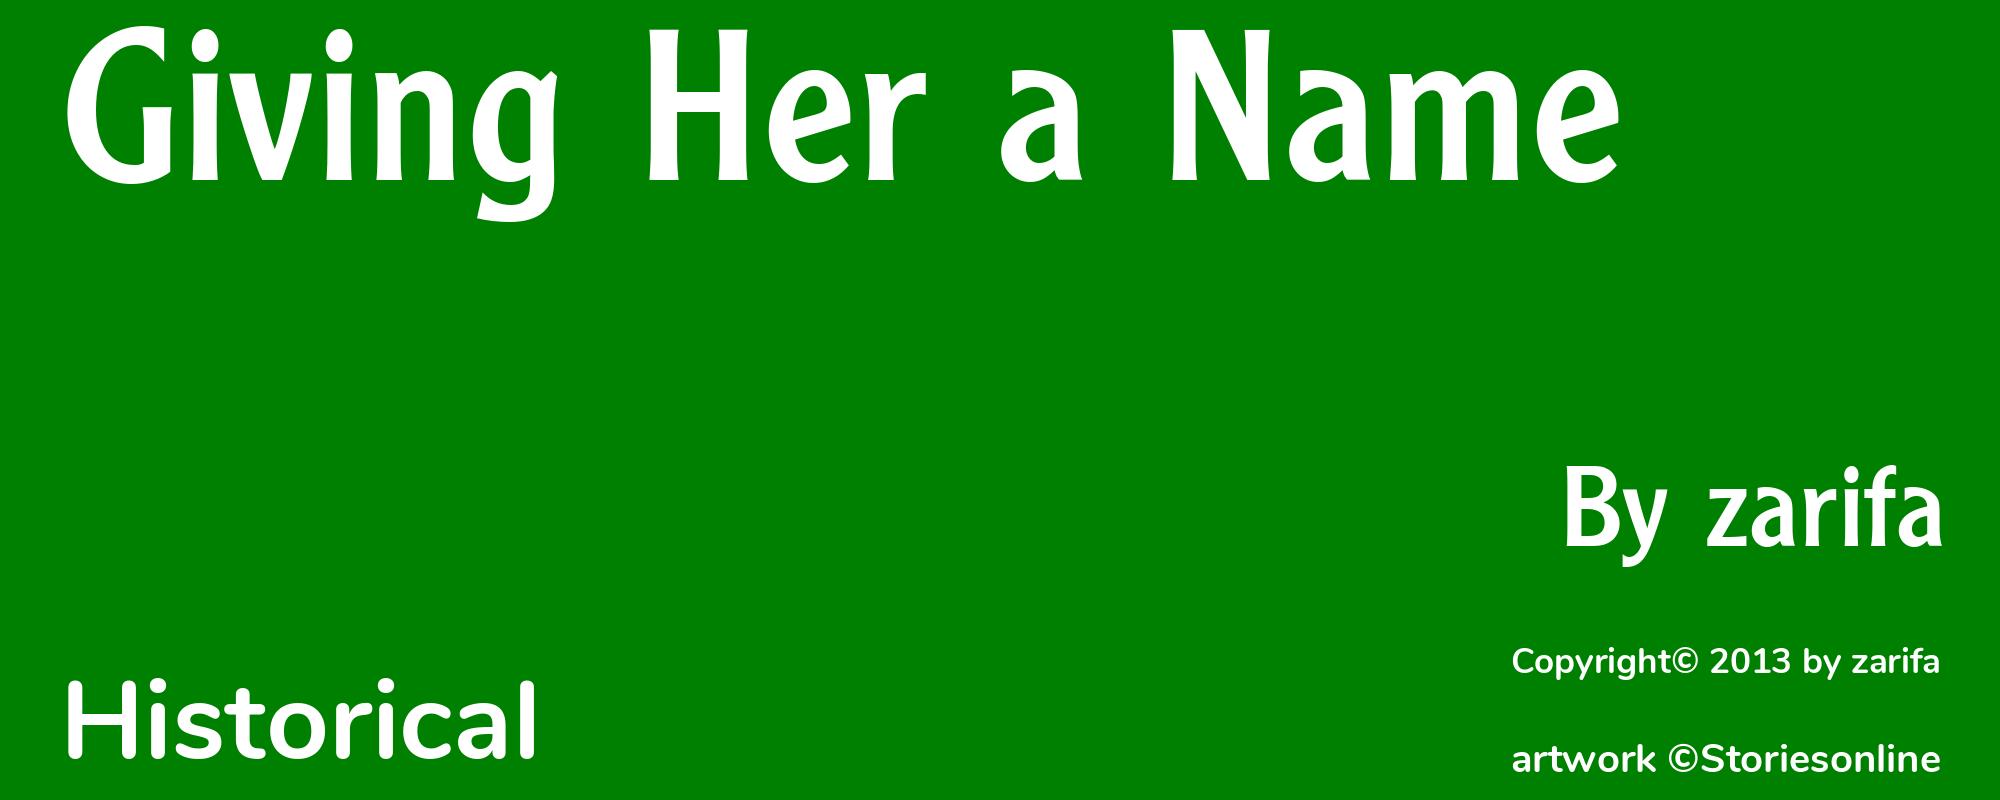 Giving Her a Name - Cover